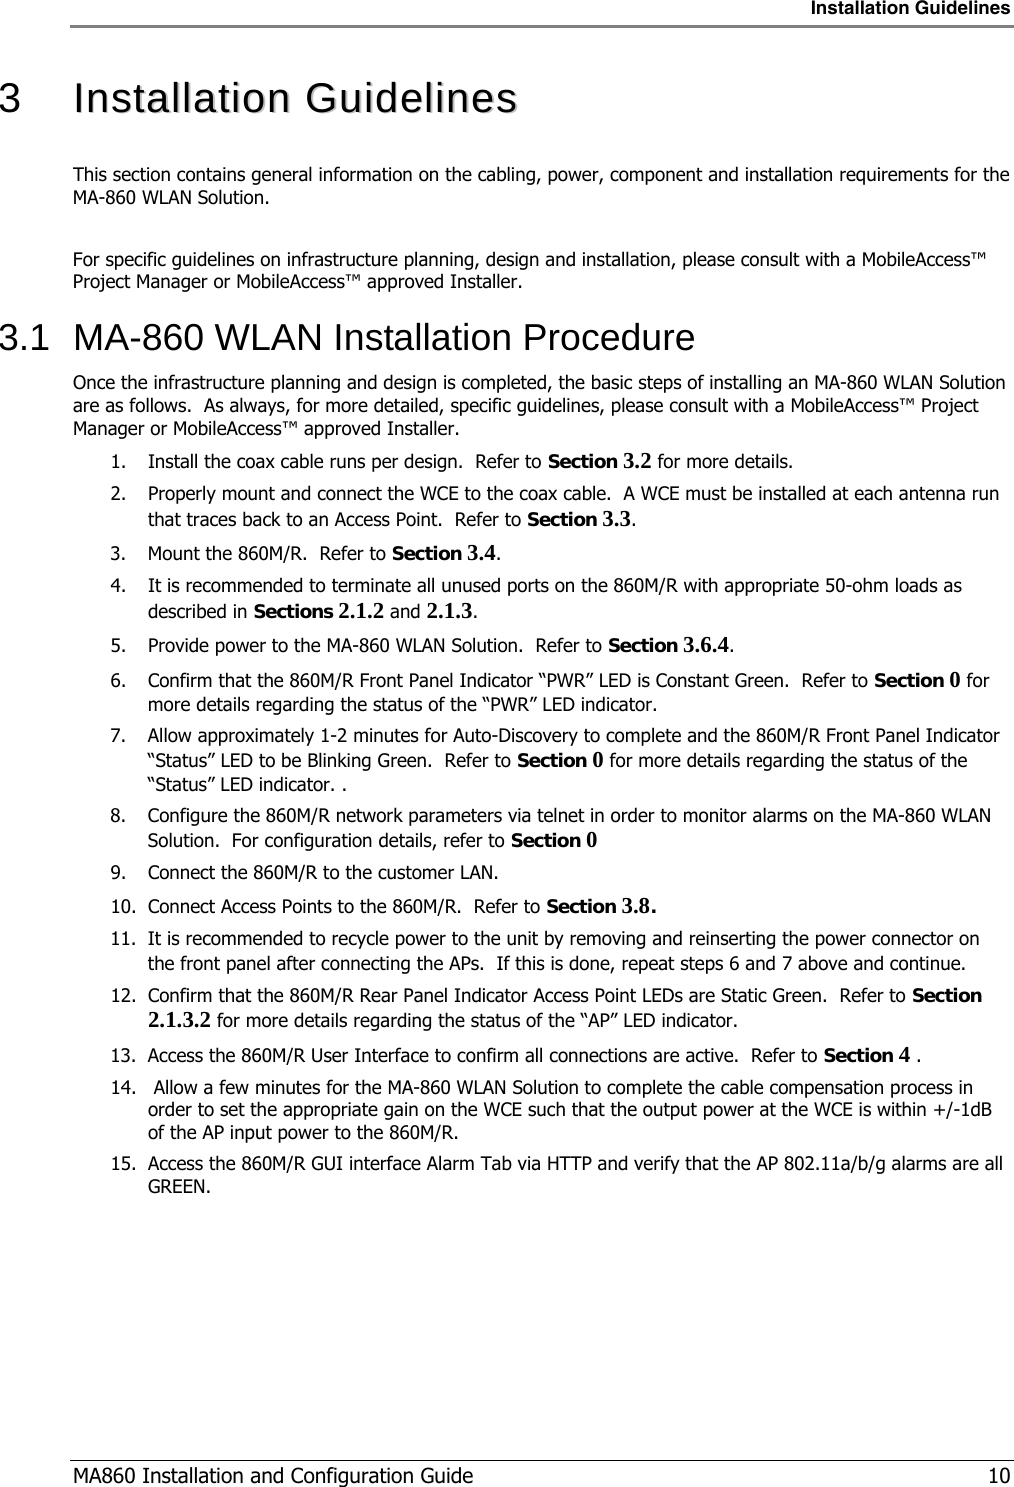 Installation Guidelines  MA860 Installation and Configuration Guide   10 3   IInnssttaallllaattiioonn  GGuuiiddeelliinneess  This section contains general information on the cabling, power, component and installation requirements for the MA-860 WLAN Solution.  For specific guidelines on infrastructure planning, design and installation, please consult with a MobileAccess™ Project Manager or MobileAccess™ approved Installer. 3.1  MA-860 WLAN Installation Procedure Once the infrastructure planning and design is completed, the basic steps of installing an MA-860 WLAN Solution are as follows.  As always, for more detailed, specific guidelines, please consult with a MobileAccess™ Project Manager or MobileAccess™ approved Installer. 1. Install the coax cable runs per design.  Refer to Section  3.2 for more details. 2. Properly mount and connect the WCE to the coax cable.  A WCE must be installed at each antenna run that traces back to an Access Point.  Refer to Section  3.3. 3. Mount the 860M/R.  Refer to Section  3.4. 4. It is recommended to terminate all unused ports on the 860M/R with appropriate 50-ohm loads as described in Sections  2.1.2 and  2.1.3. 5. Provide power to the MA-860 WLAN Solution.  Refer to Section  3.6.4. 6. Confirm that the 860M/R Front Panel Indicator “PWR” LED is Constant Green.  Refer to Section  0  for more details regarding the status of the “PWR” LED indicator. 7. Allow approximately 1-2 minutes for Auto-Discovery to complete and the 860M/R Front Panel Indicator “Status” LED to be Blinking Green.  Refer to Section  0  for more details regarding the status of the “Status” LED indicator. .  8. Configure the 860M/R network parameters via telnet in order to monitor alarms on the MA-860 WLAN Solution.  For configuration details, refer to Section  0  9. Connect the 860M/R to the customer LAN.  10. Connect Access Points to the 860M/R.  Refer to Section  3.8. 11. It is recommended to recycle power to the unit by removing and reinserting the power connector on the front panel after connecting the APs.  If this is done, repeat steps  6 and  7 above and continue. 12. Confirm that the 860M/R Rear Panel Indicator Access Point LEDs are Static Green.  Refer to Section  2.1.3.2 for more details regarding the status of the “AP” LED indicator. 13. Access the 860M/R User Interface to confirm all connections are active.  Refer to Section  4  . 14.  Allow a few minutes for the MA-860 WLAN Solution to complete the cable compensation process in order to set the appropriate gain on the WCE such that the output power at the WCE is within +/-1dB of the AP input power to the 860M/R.  15. Access the 860M/R GUI interface Alarm Tab via HTTP and verify that the AP 802.11a/b/g alarms are all GREEN. 